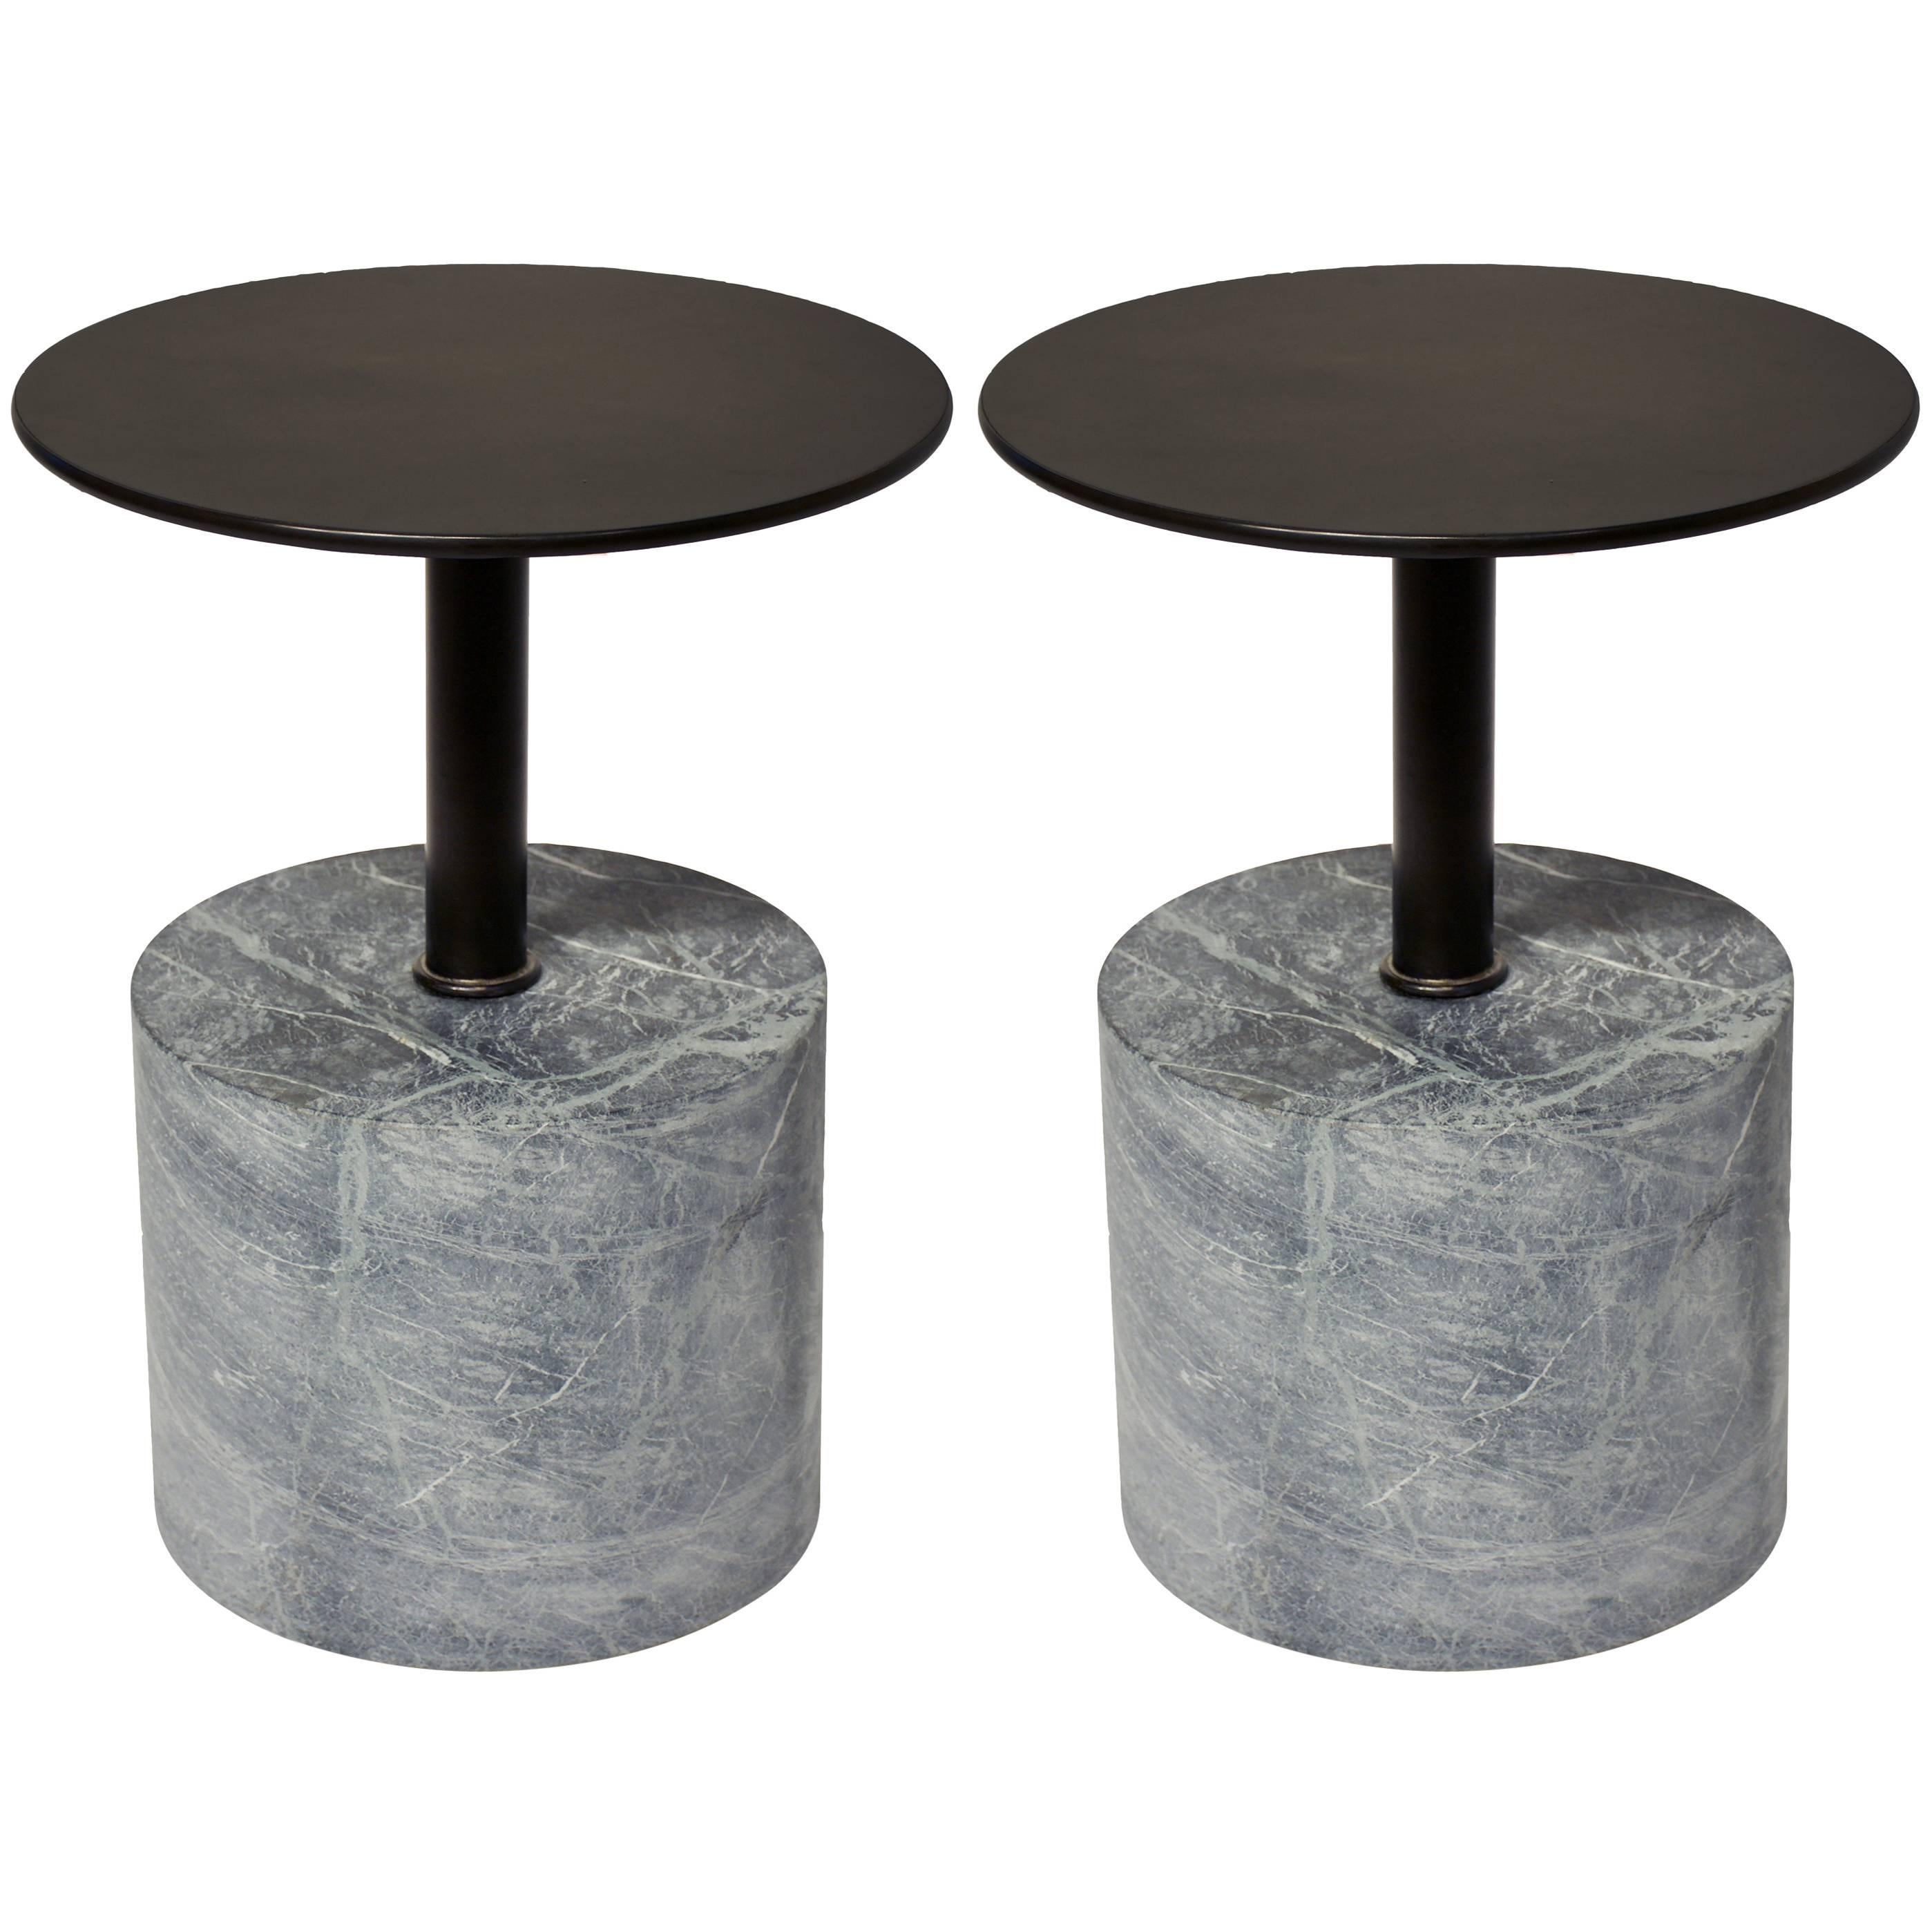 Modernist End Table, Honed Verde Alpi Marble Base with Patined Steel Top